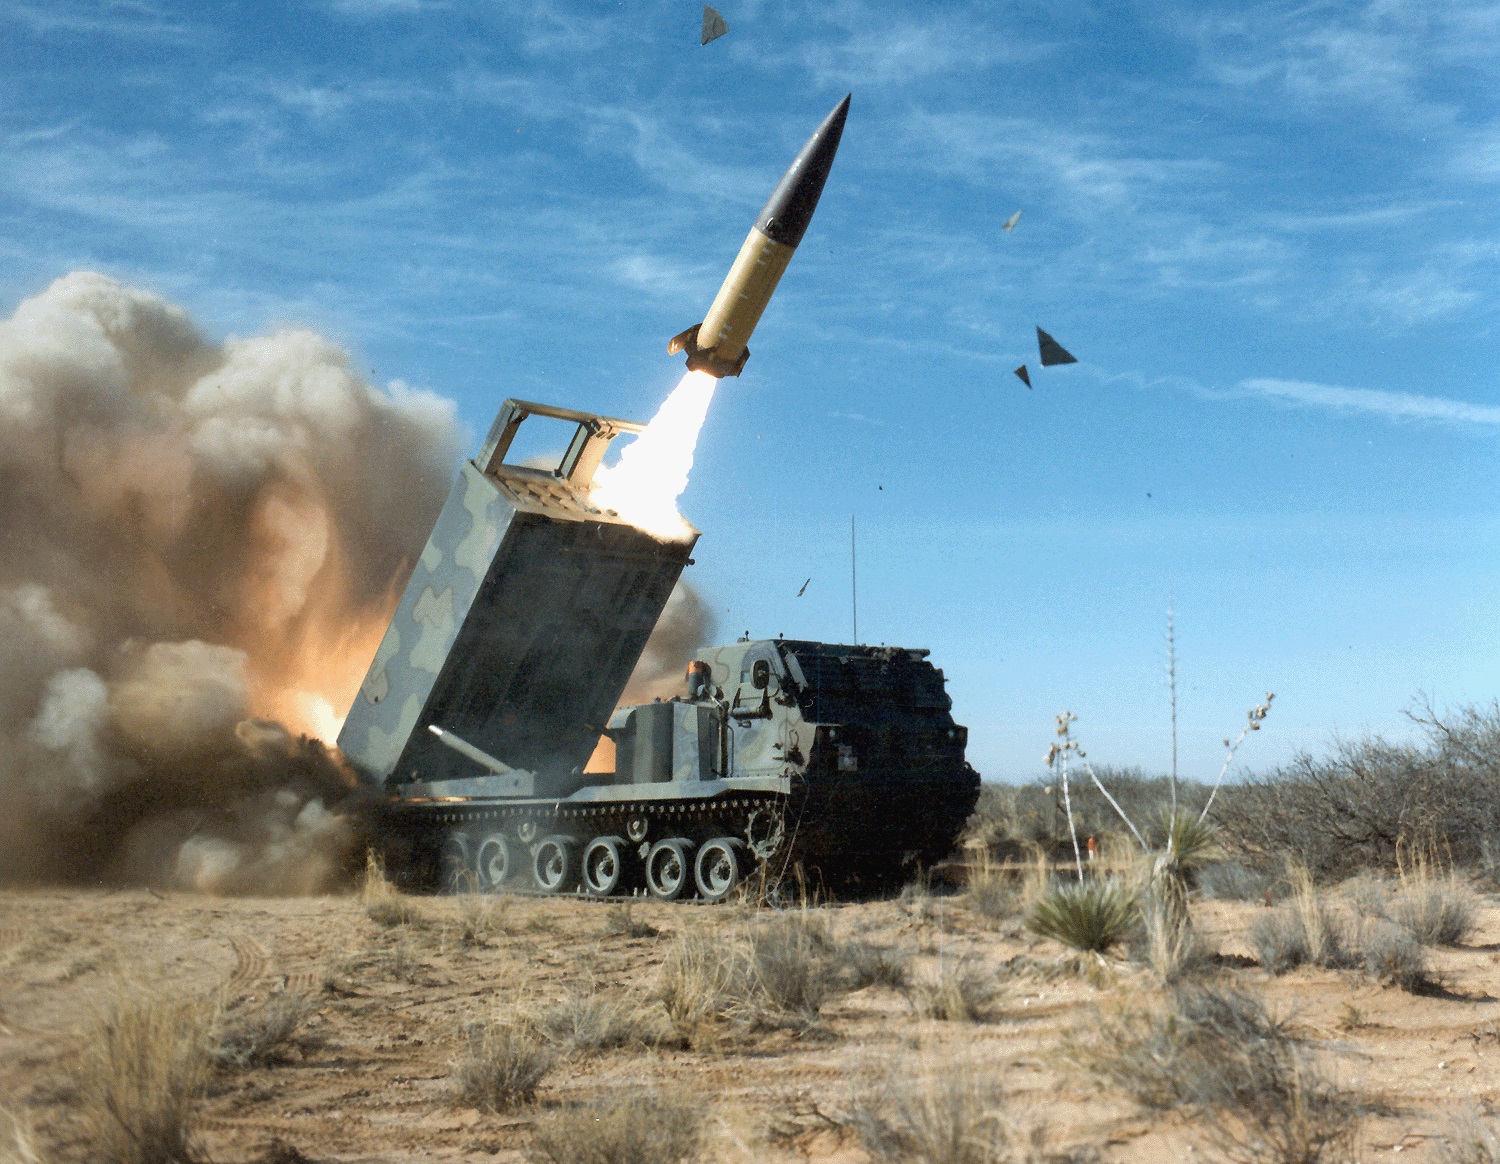 An Army Tactical Missile System (ATACMS) being launched by a M270